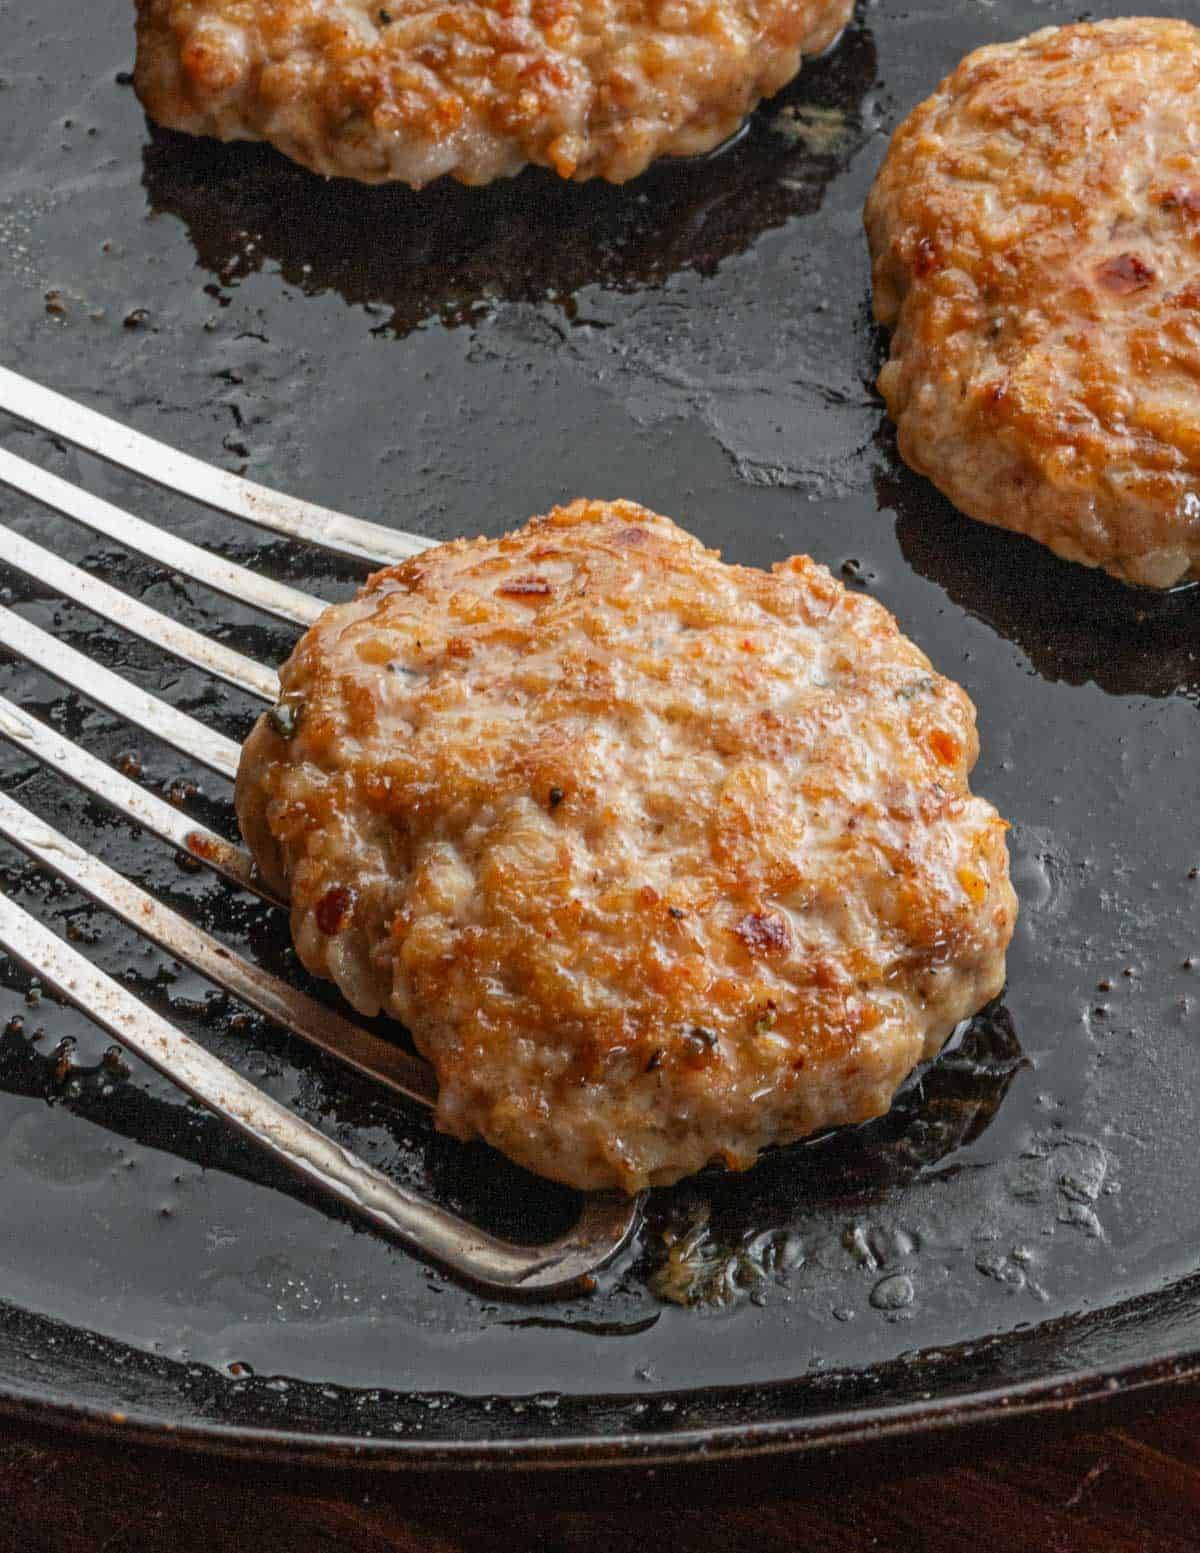 Cooking a test patty of chicken andouille sausage to test the flavor. 